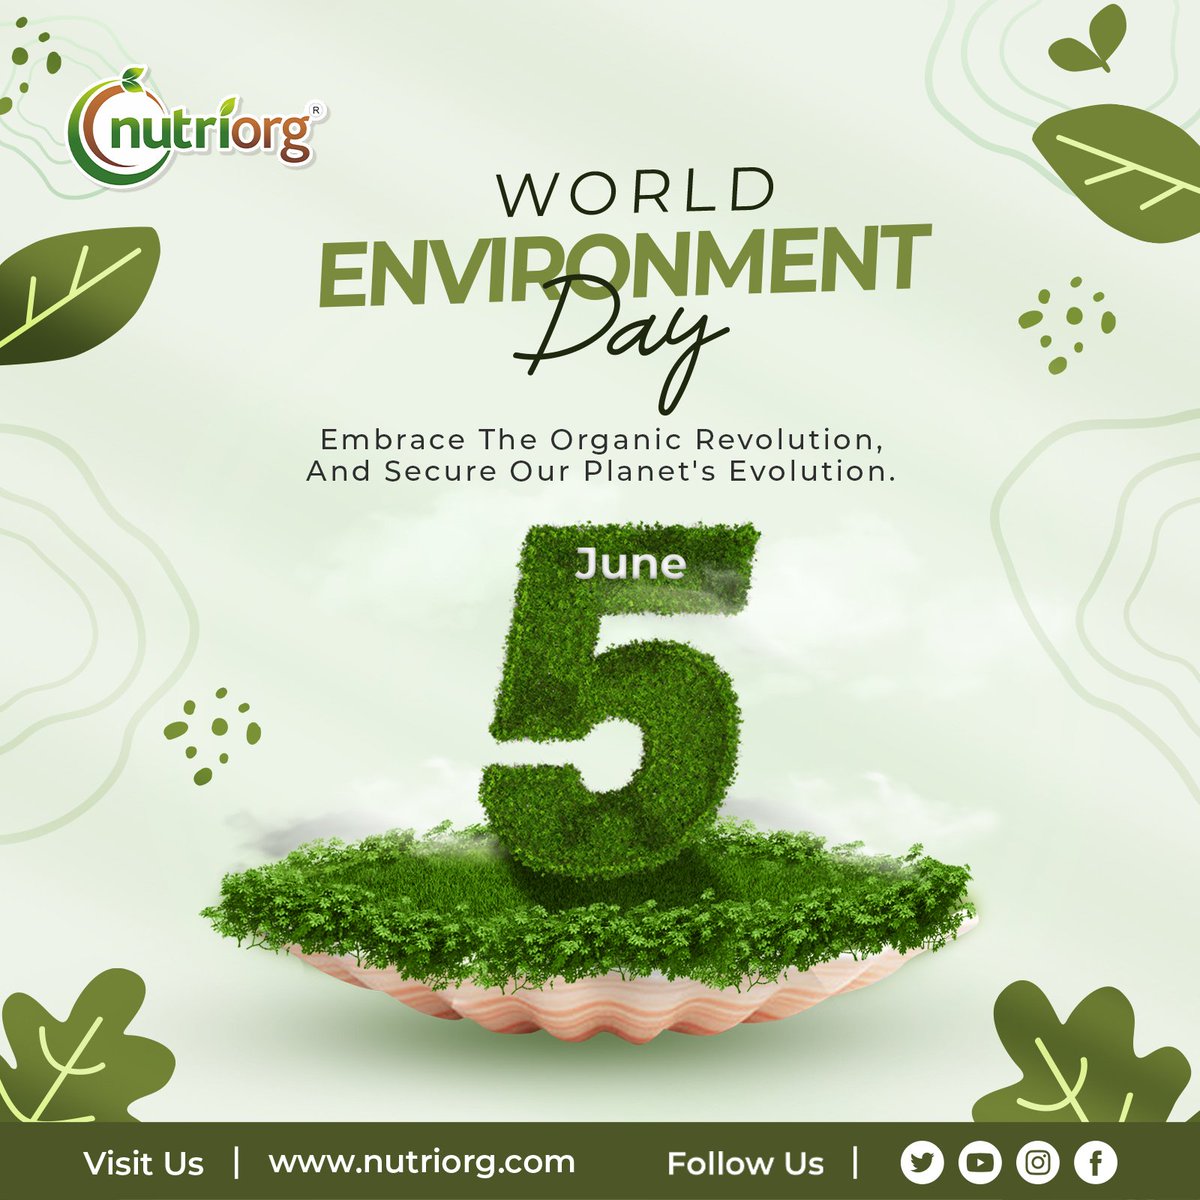 🌱Embrace the organic revolution, and secure our planet's evolution🍃

World Environment Day🌳🌍 

#nutriorg #environment #worldenvironmentday #organic #gogreen #healthyplanet #trees #happyenvironmentday #saveearth